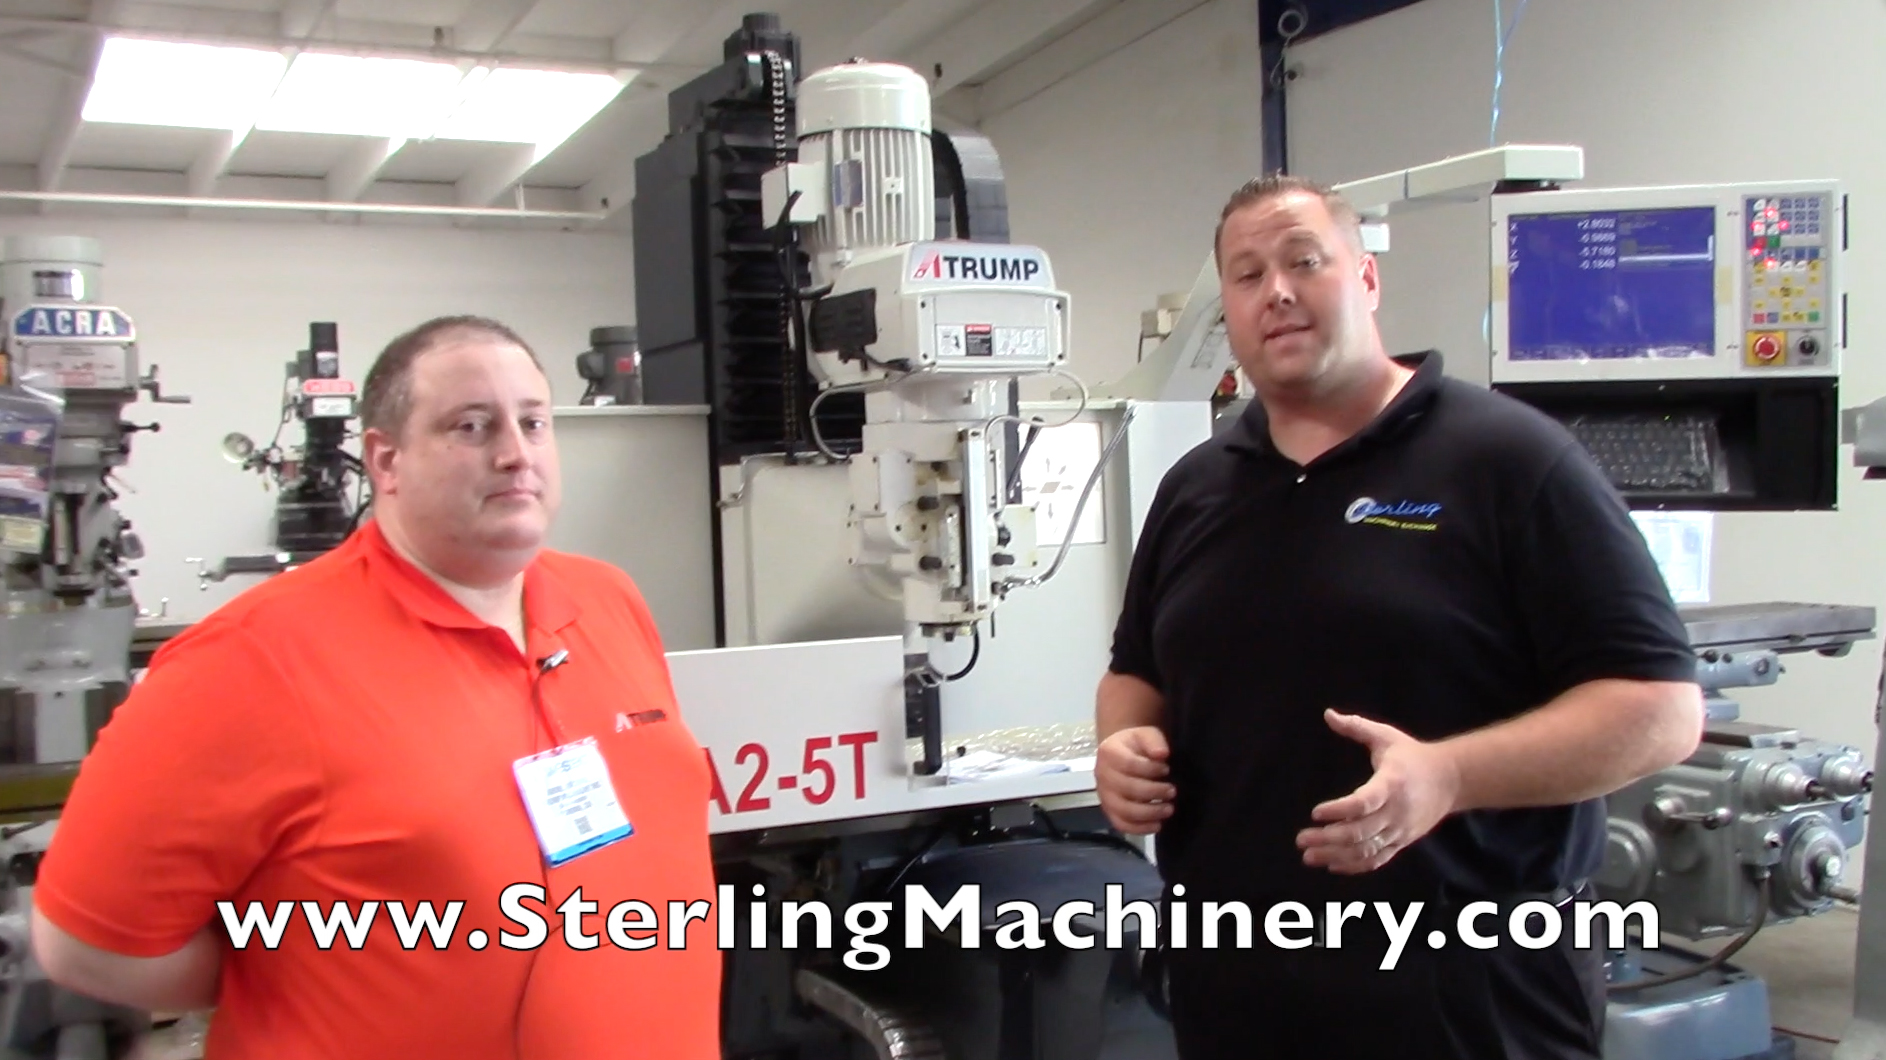 Atrump-Sterling Machinery Annual Demo Day 2015 Atrump Demonstration of 10" x 54" Brand New Atrump CNC Bed Milling Machine, Mdl. A2-5T, Centroid M400I Control with 15" Color LCD, Shop Floor Programming/ Conversational, USB 2.0 Port, RS-232 Interface, 60 GB Solid State Hard Drive, Auto Lubrication System, Coolant System, Splas-01